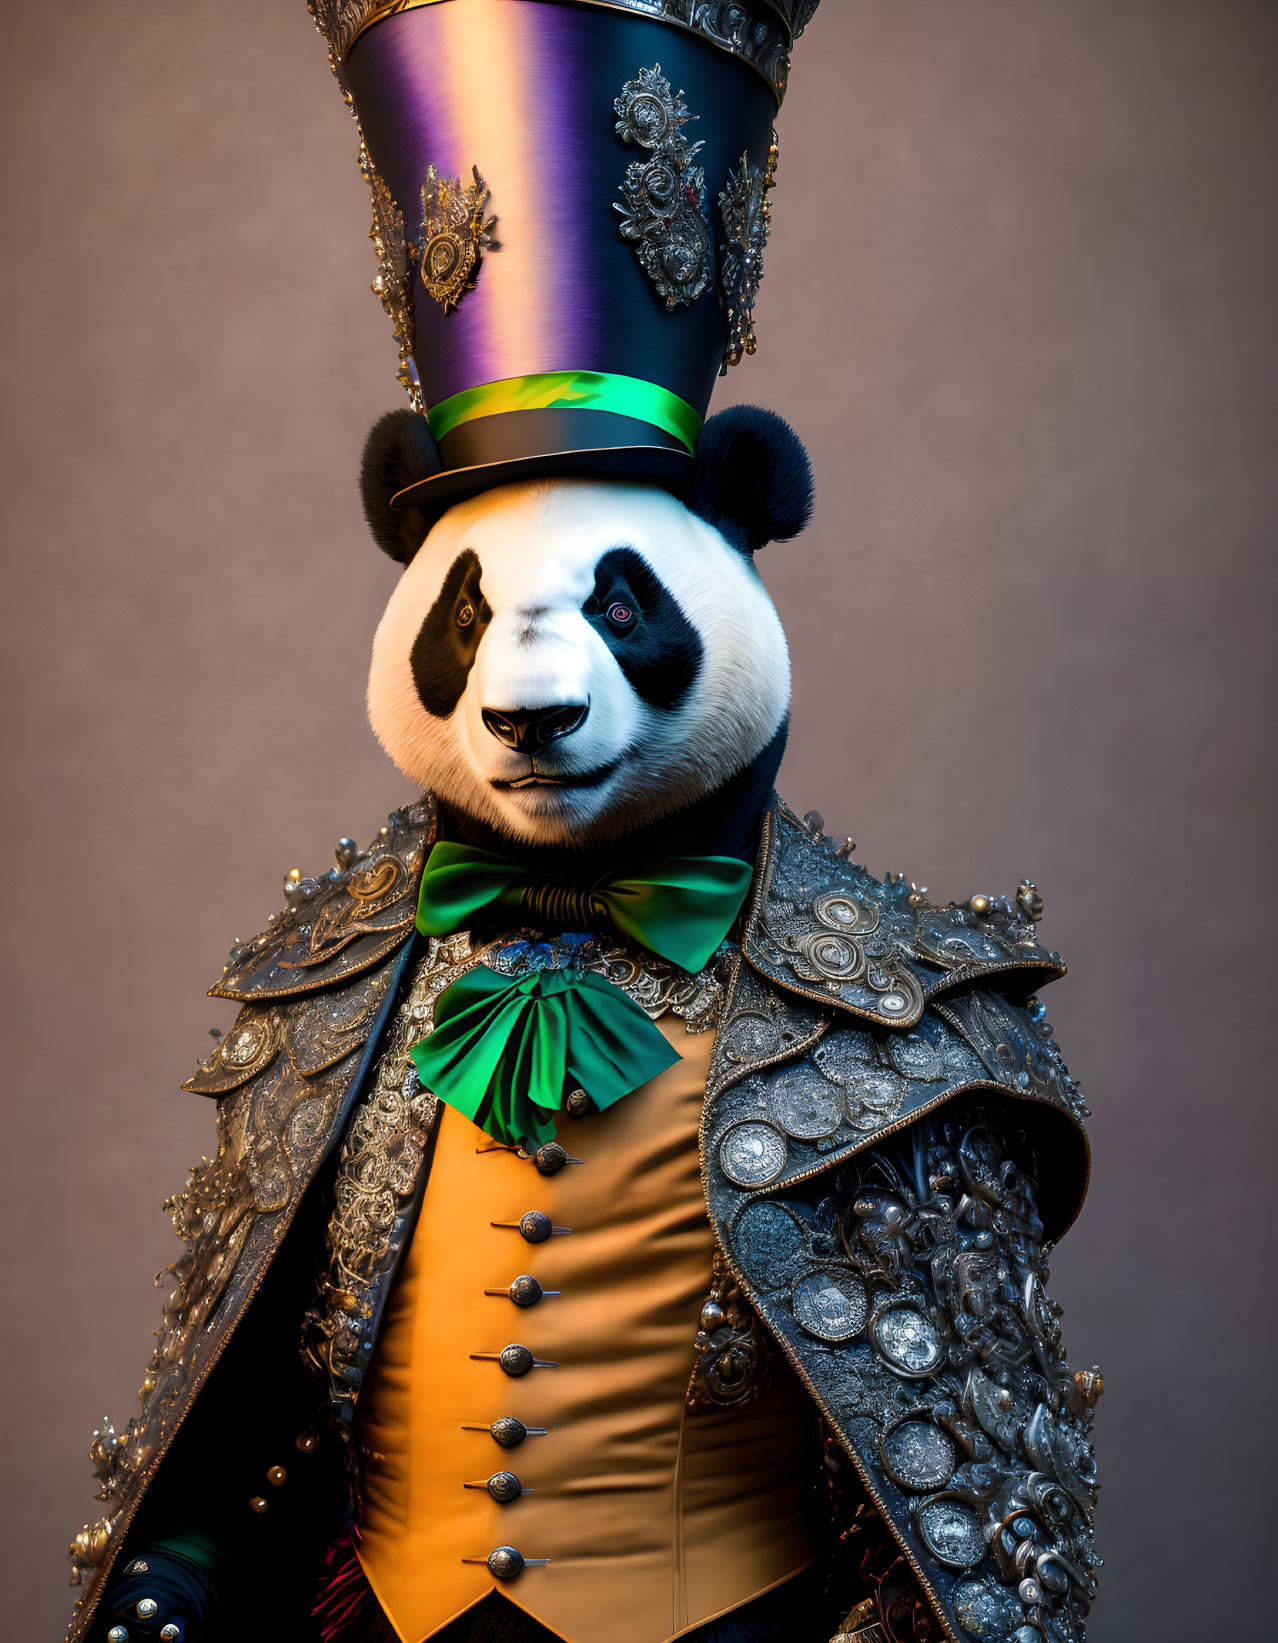 Elaborate Panda Costume with Top Hat and Ornate Coat on Brown Background